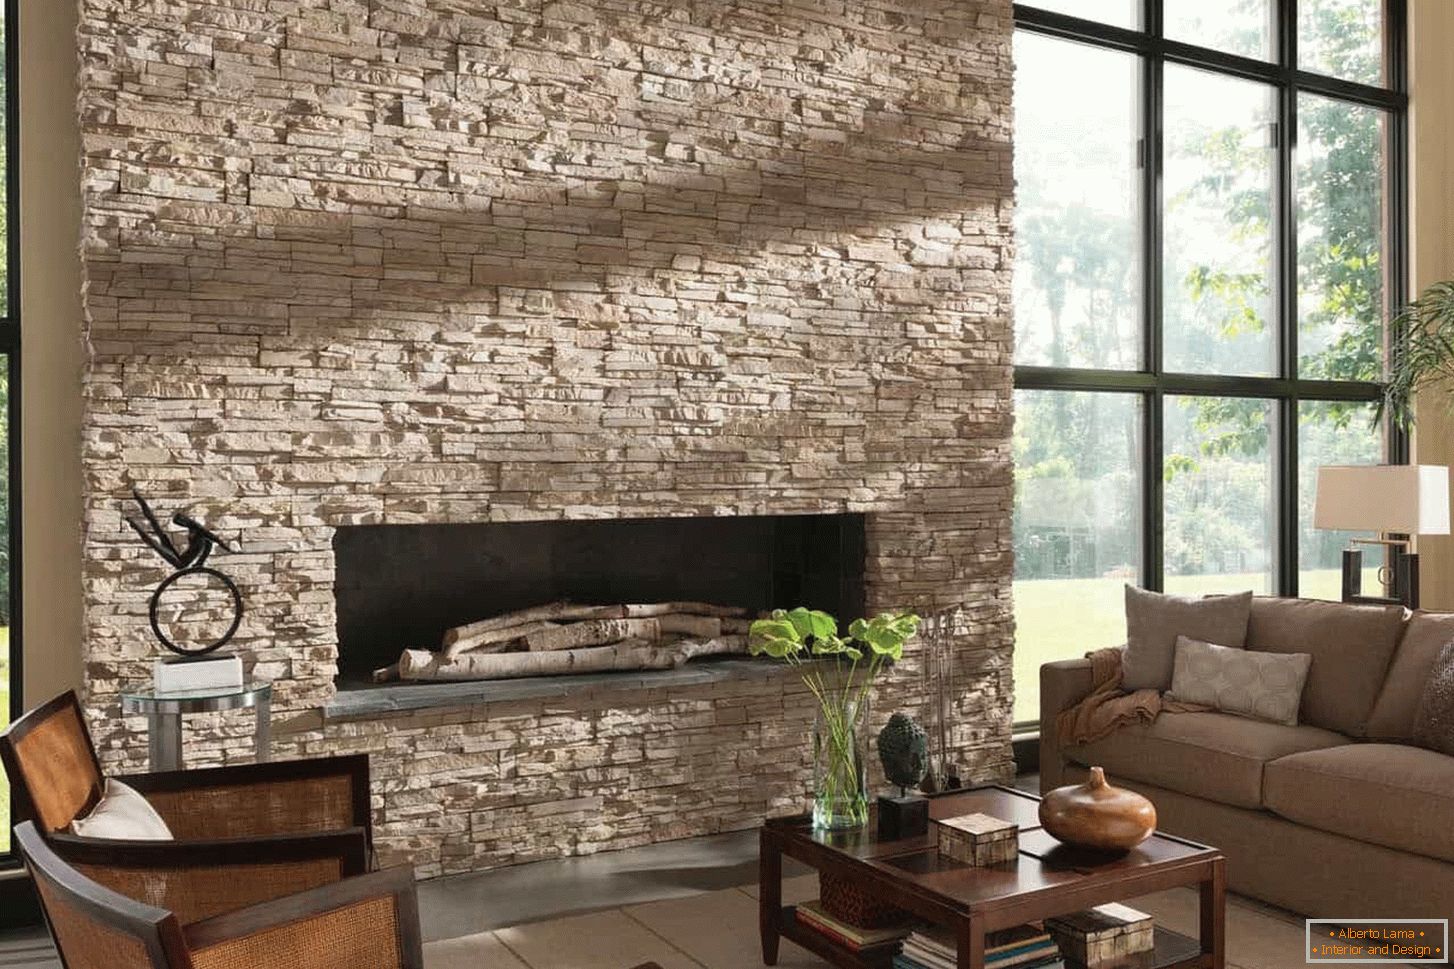 Artificial stone on the wall with a fireplace